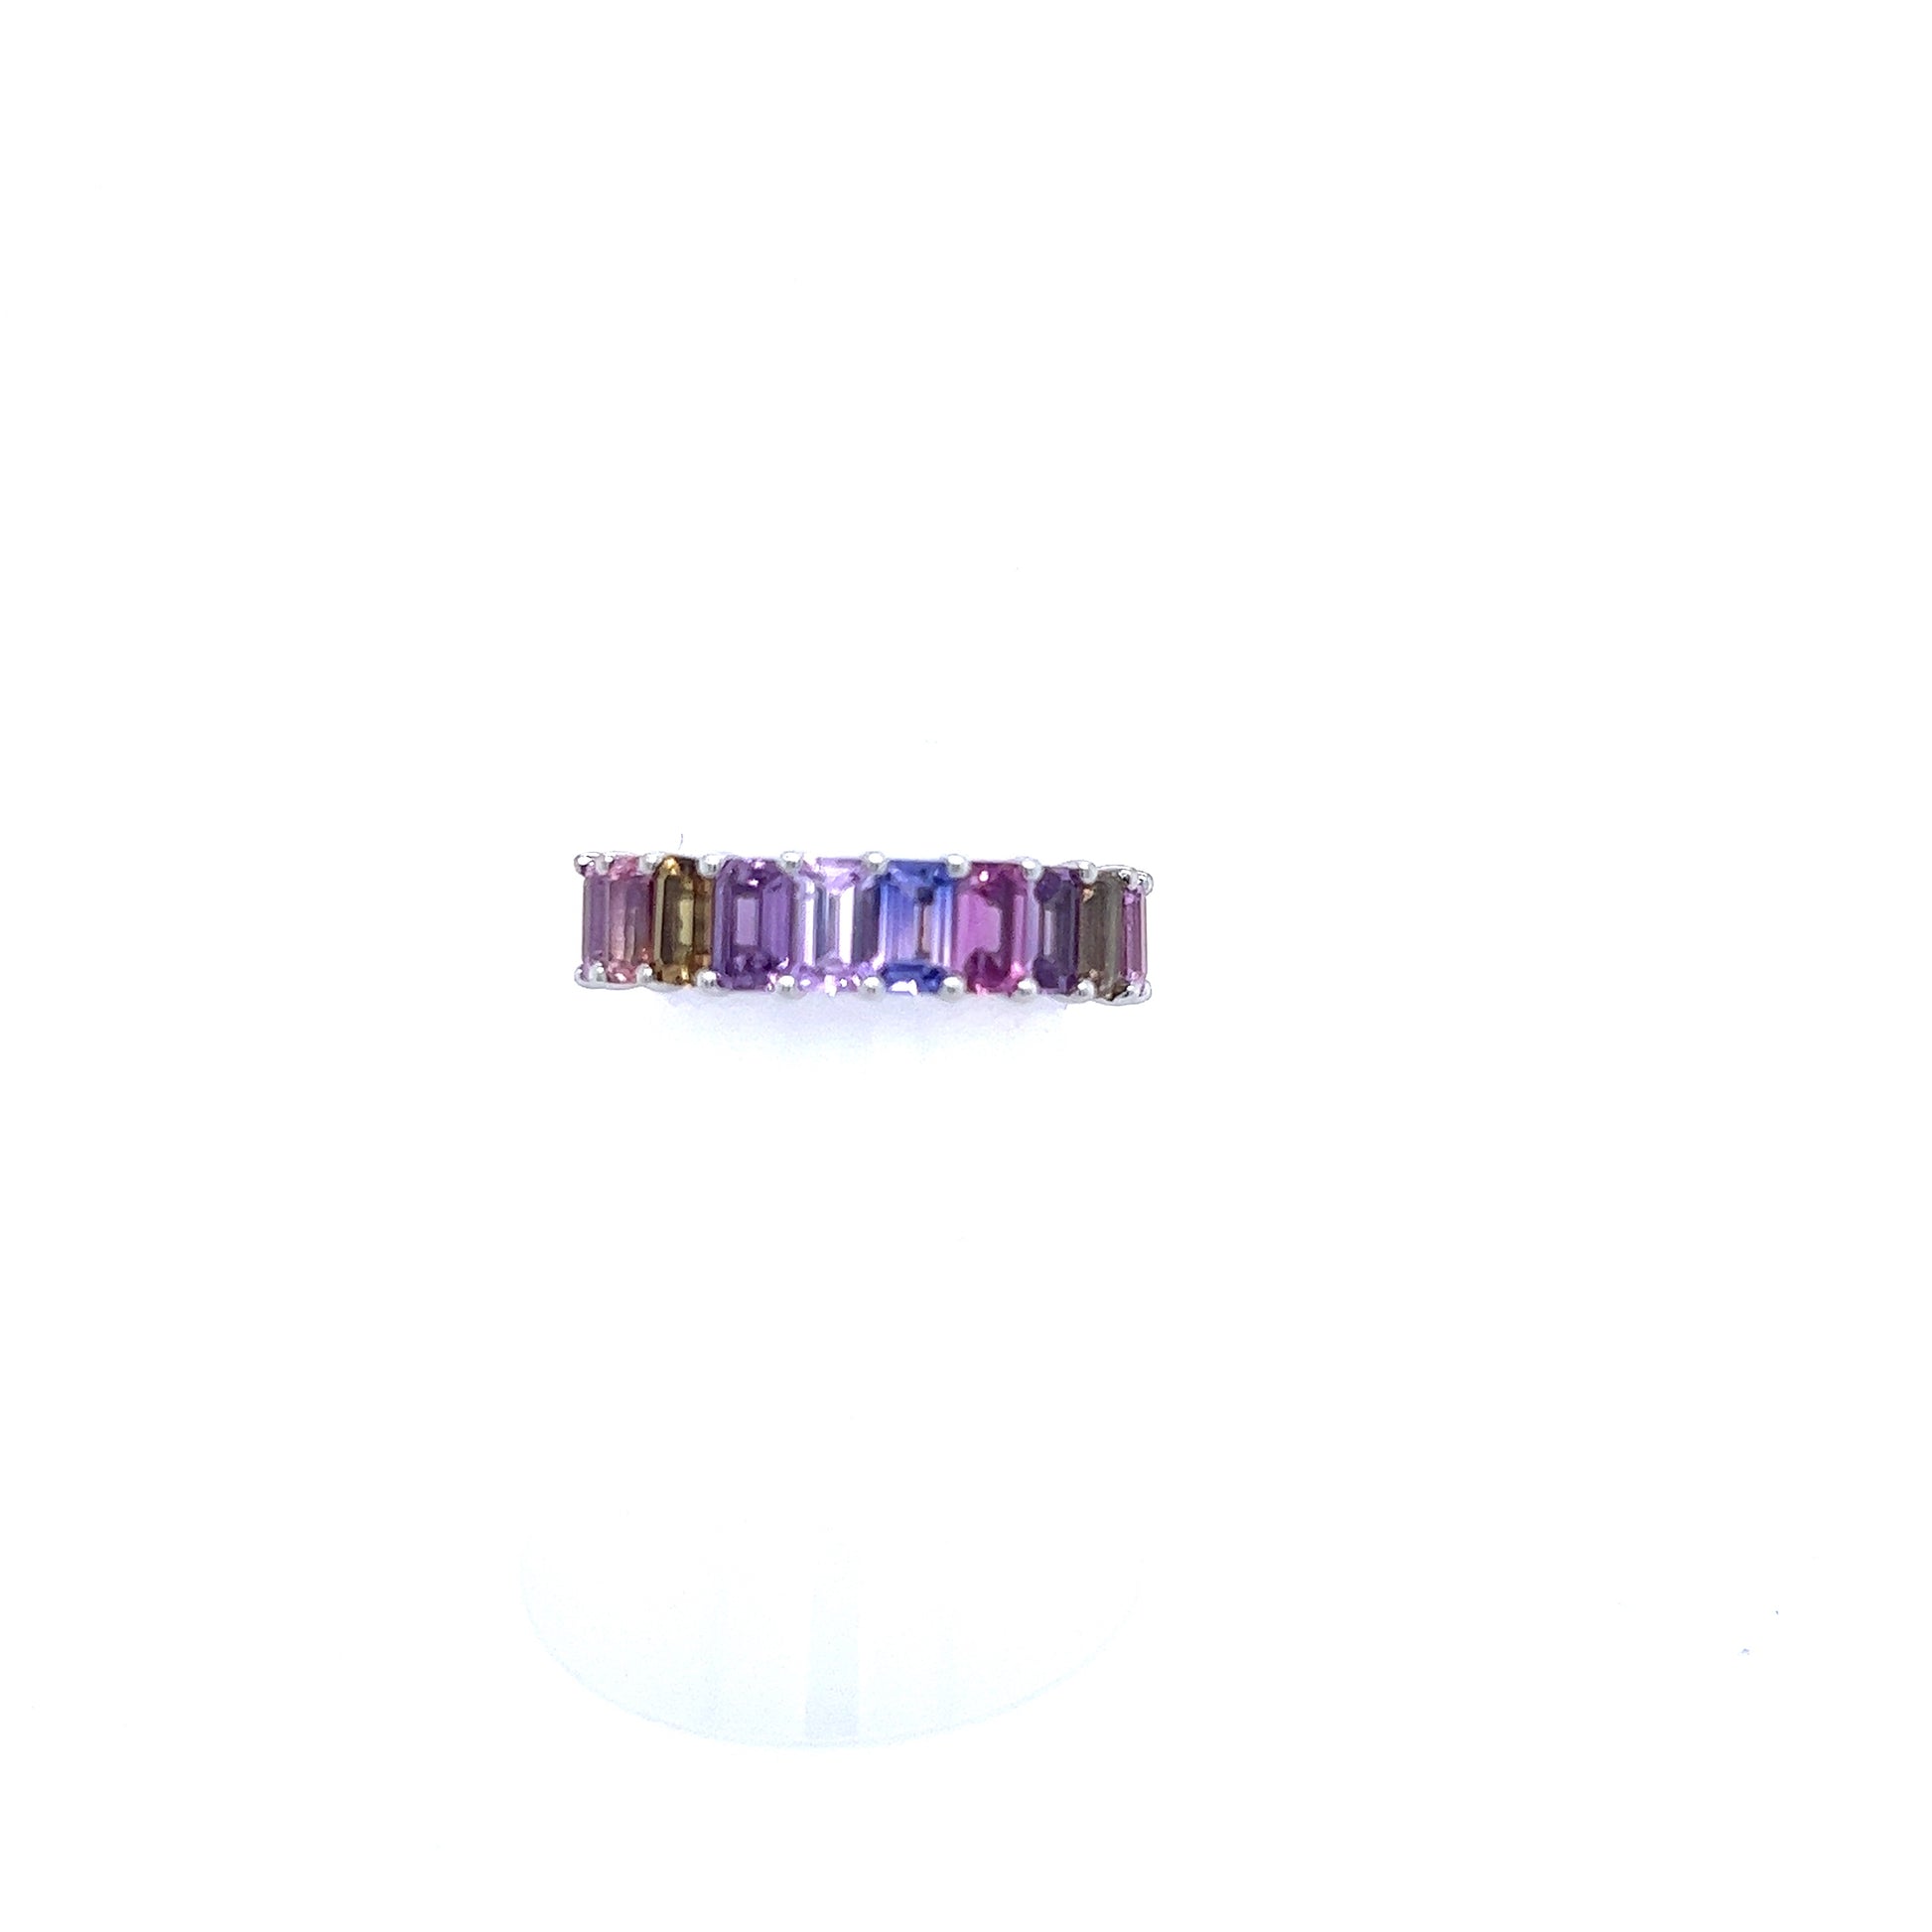 Natural Multicolored Sapphire Ring Size 6.5 14k W Gold 5.28 TCW Certified $3,950 217061